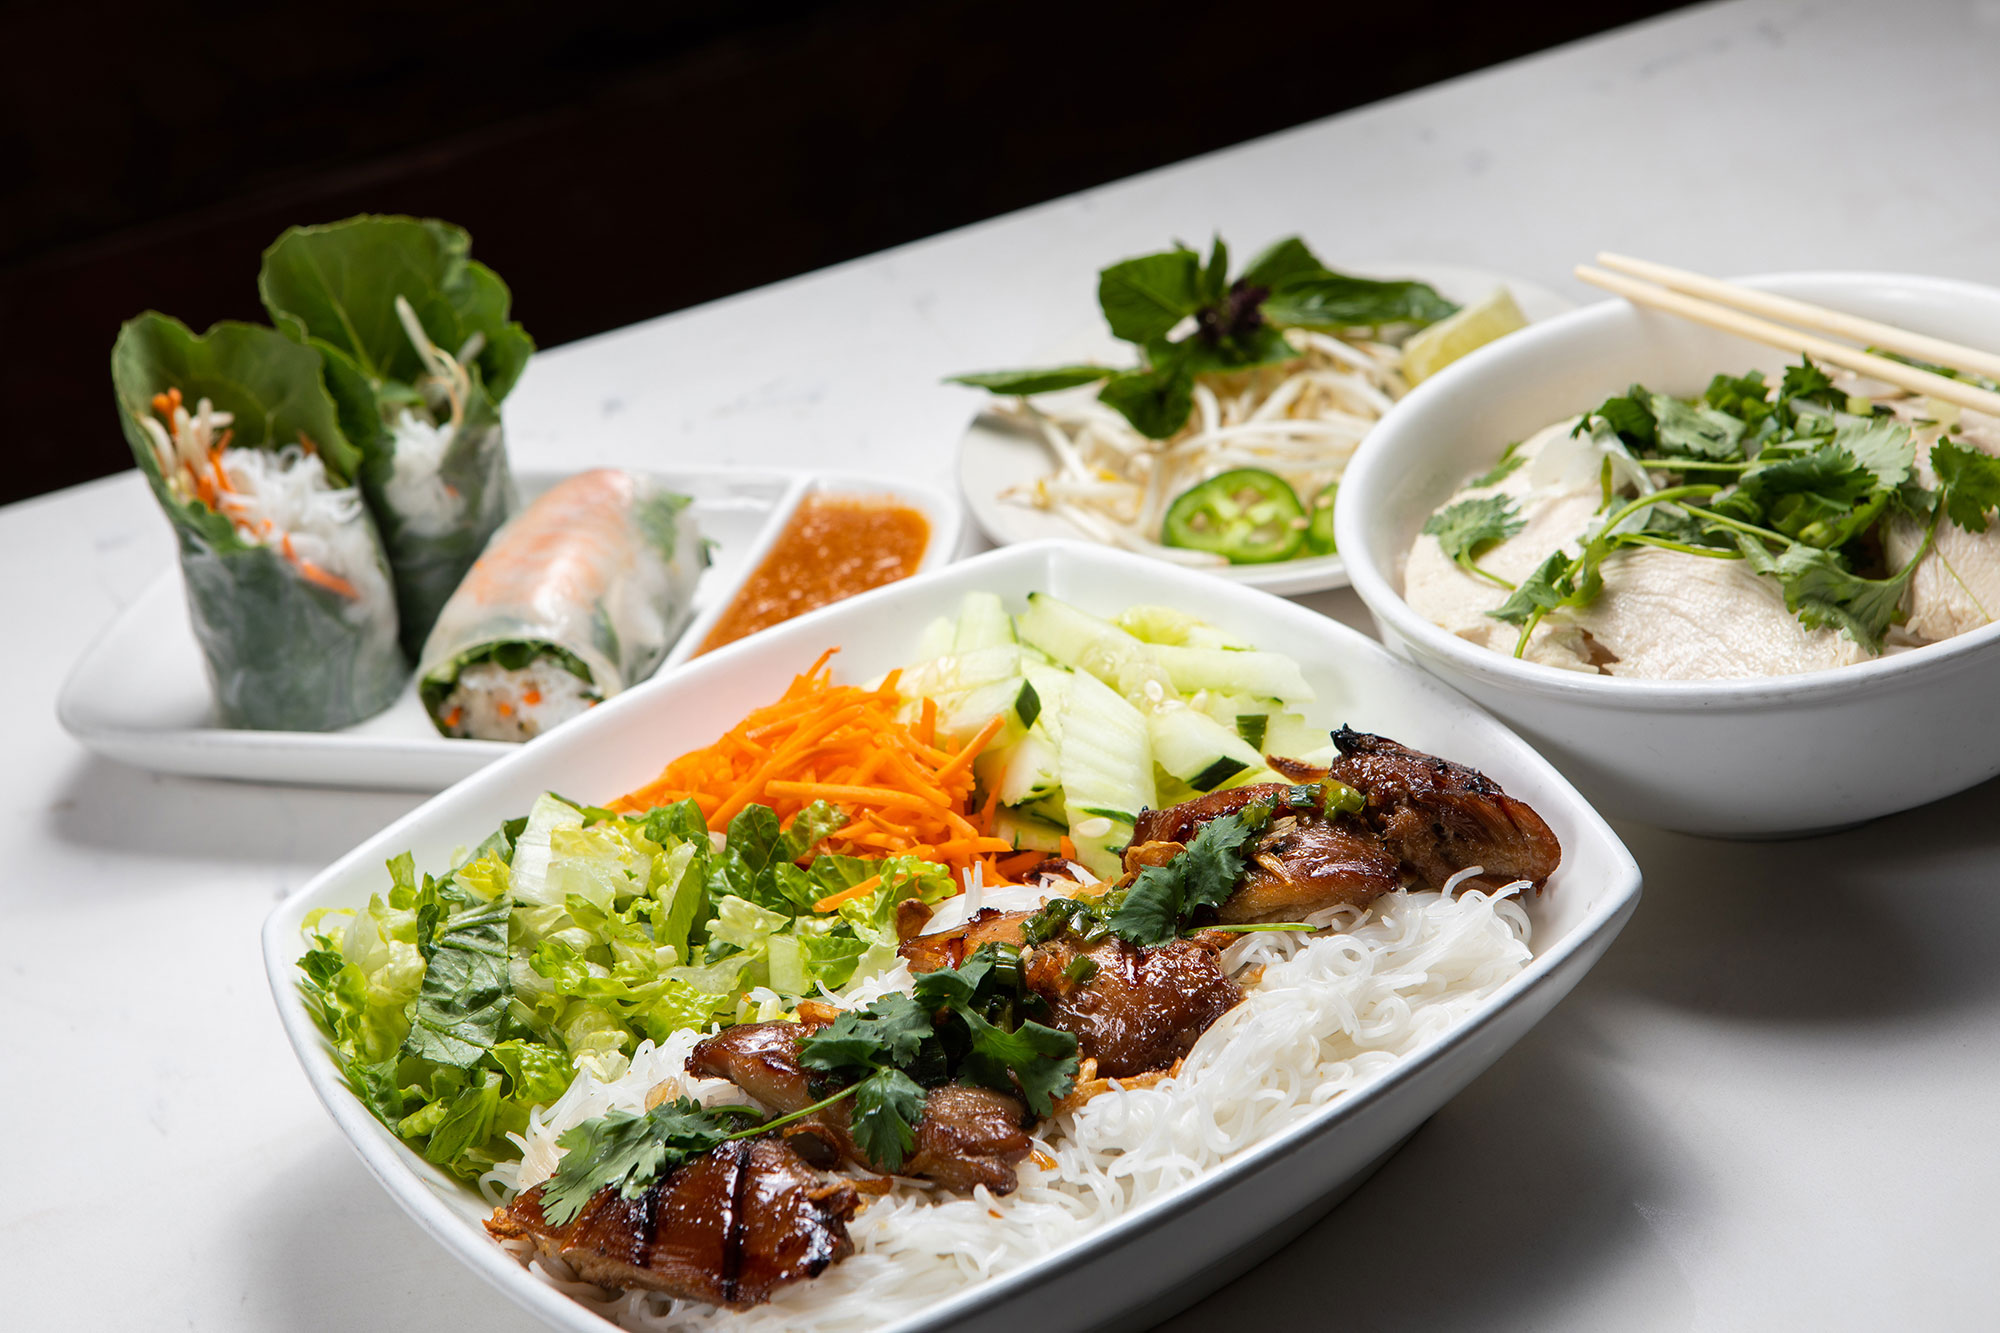 SEA Bambuza Plated Food (vermicelli noodles, pho, spring rolls)